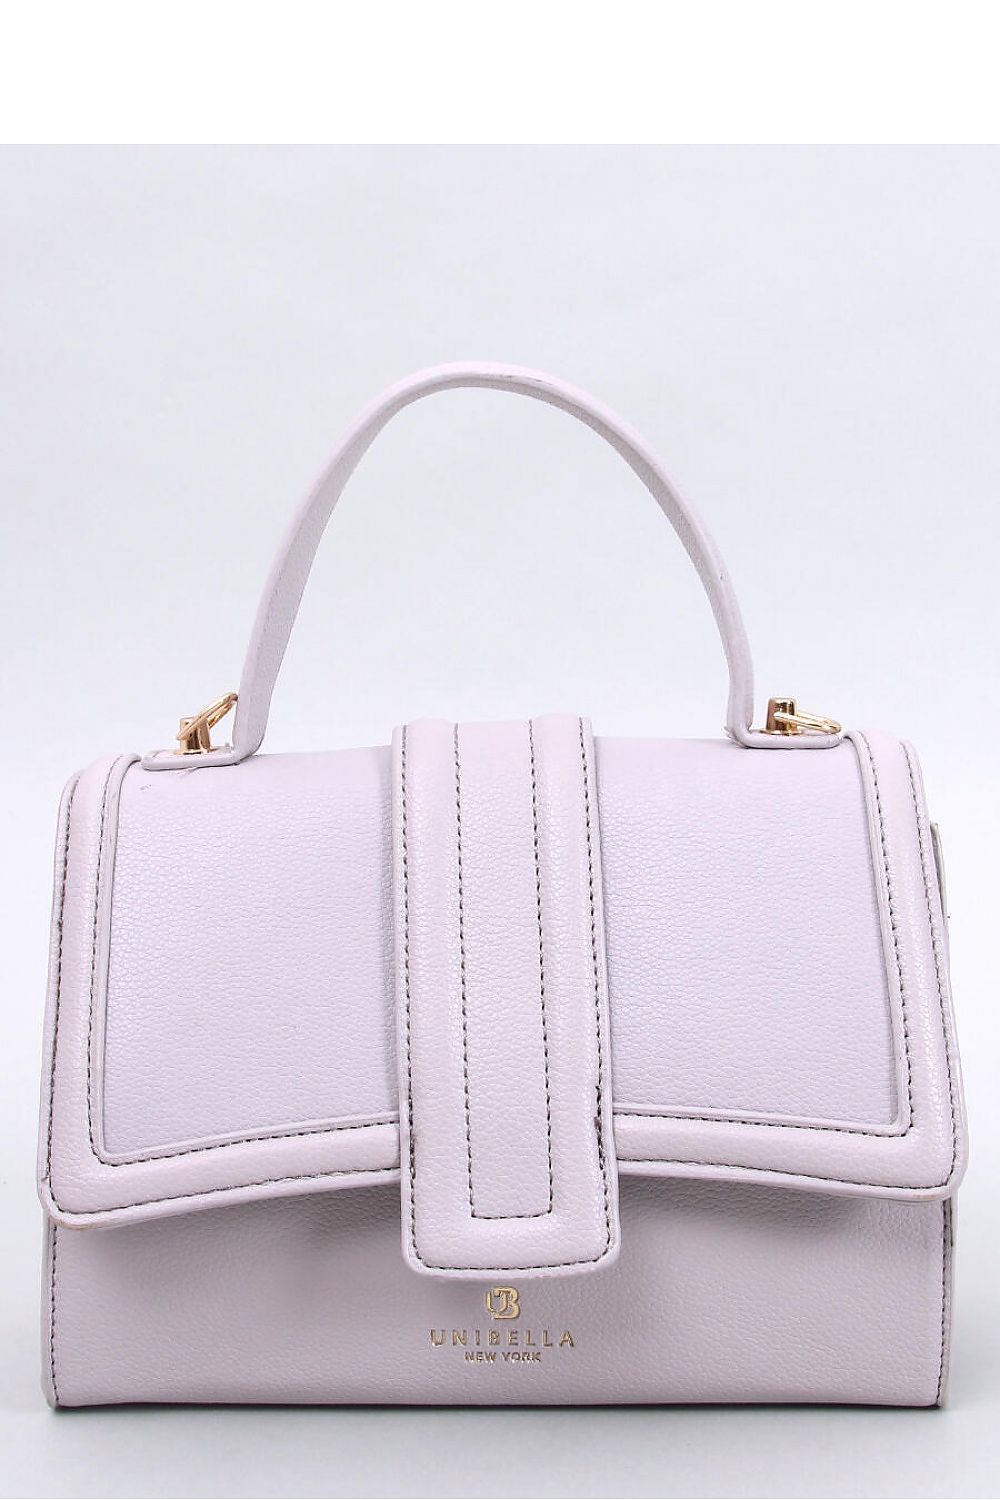 Inello Classic Pale Pink Trunk Handbag - Timeless Elegance with Two-Way Carriage